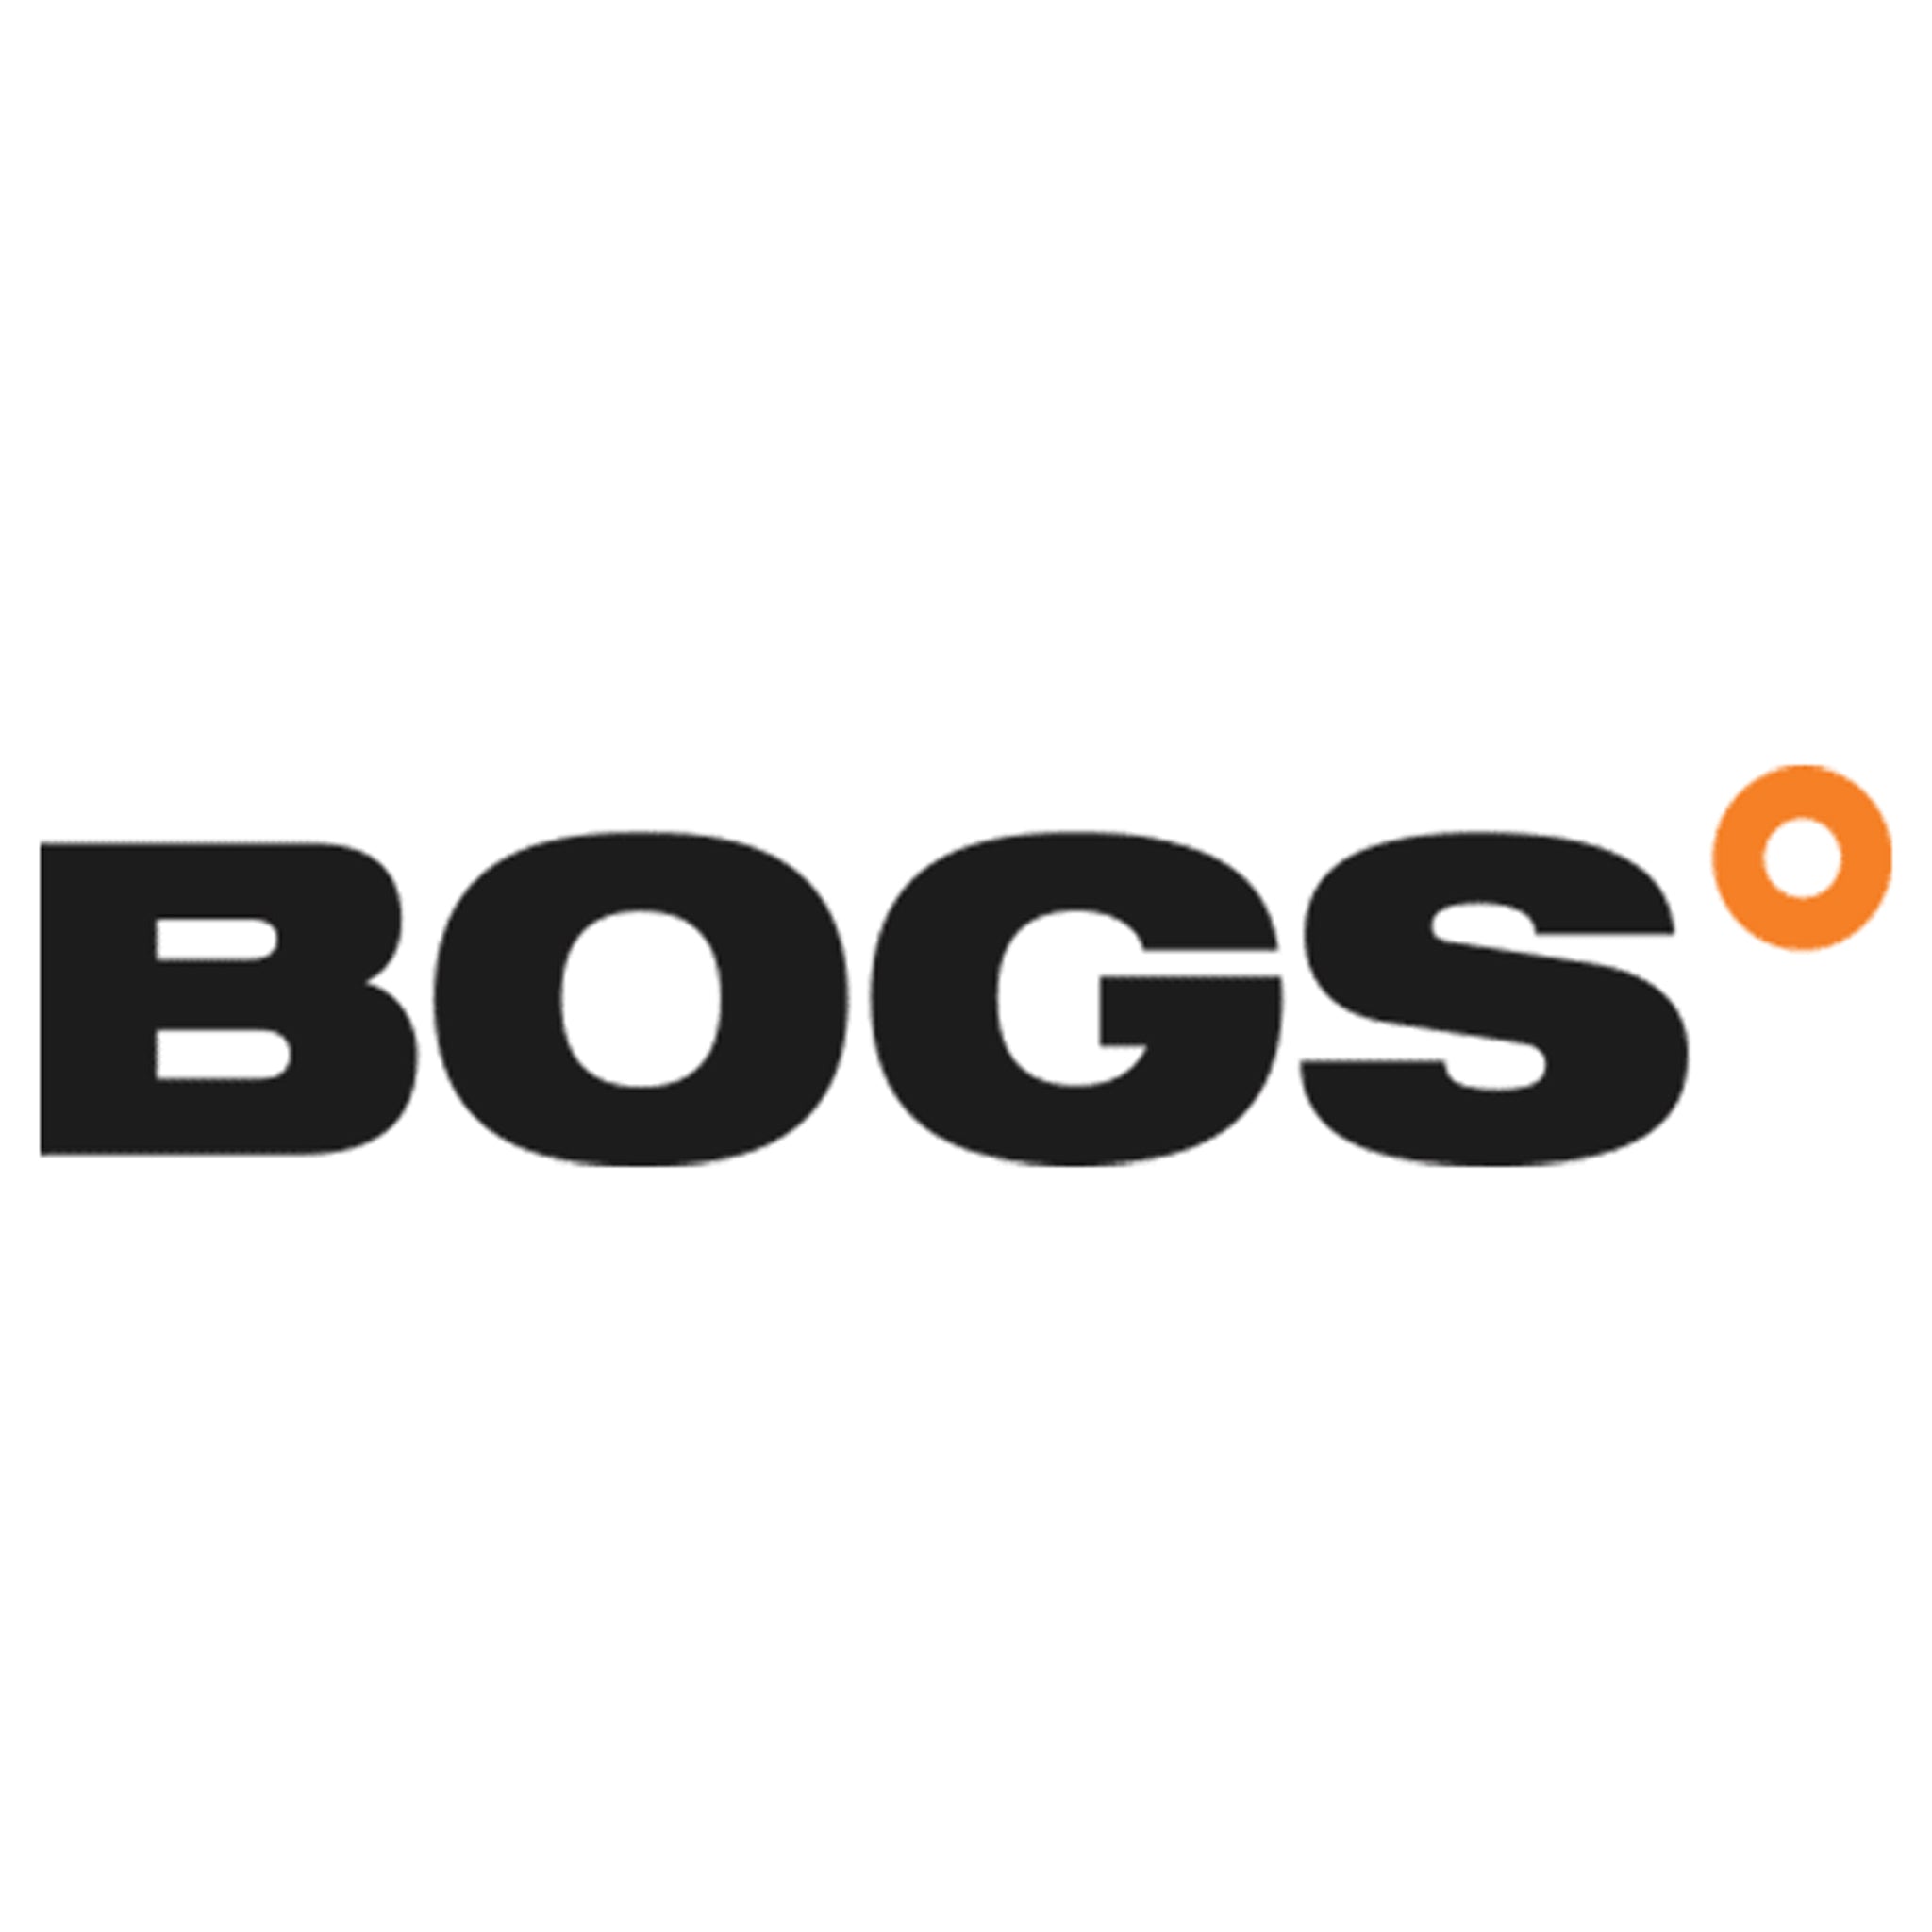 Bogs: Boots For The Bold